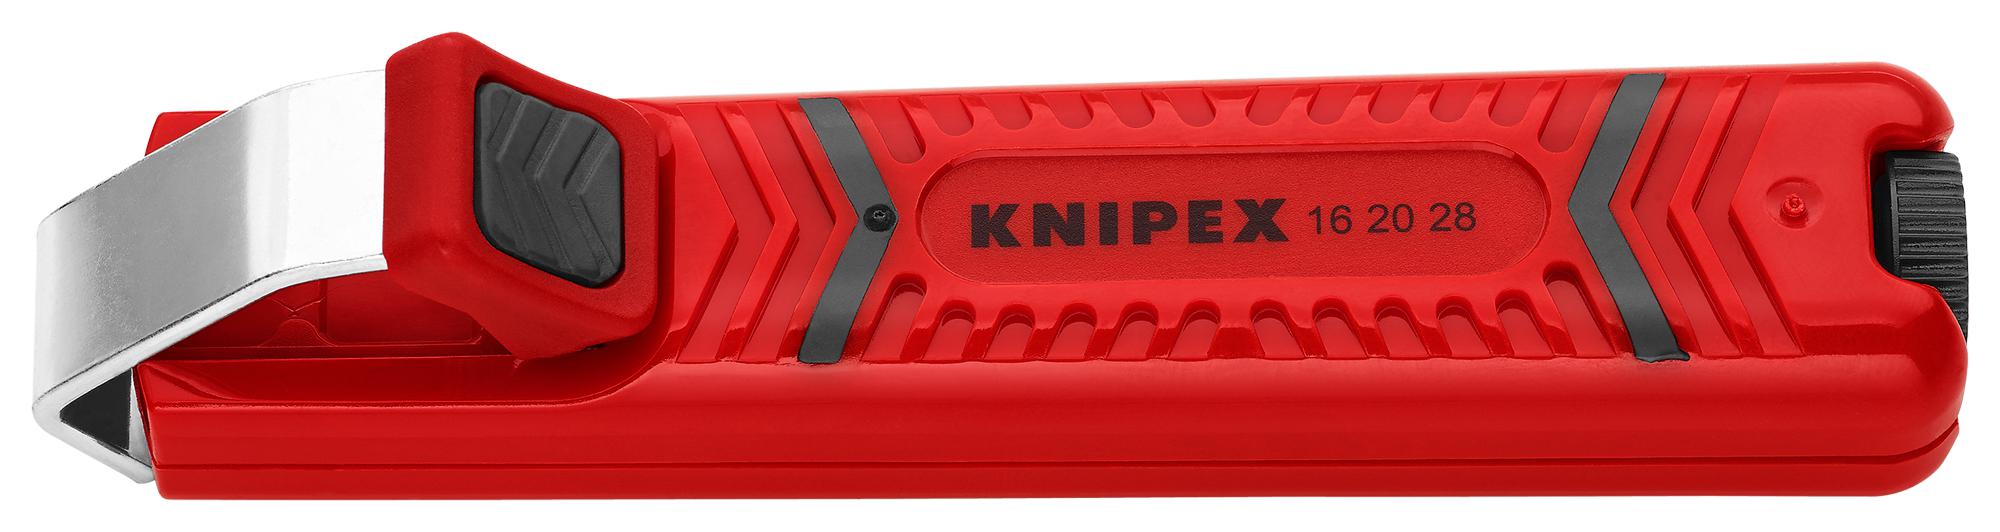 Knipex 16 20 28 Sb Cable Stripping Tool, 8-28mm